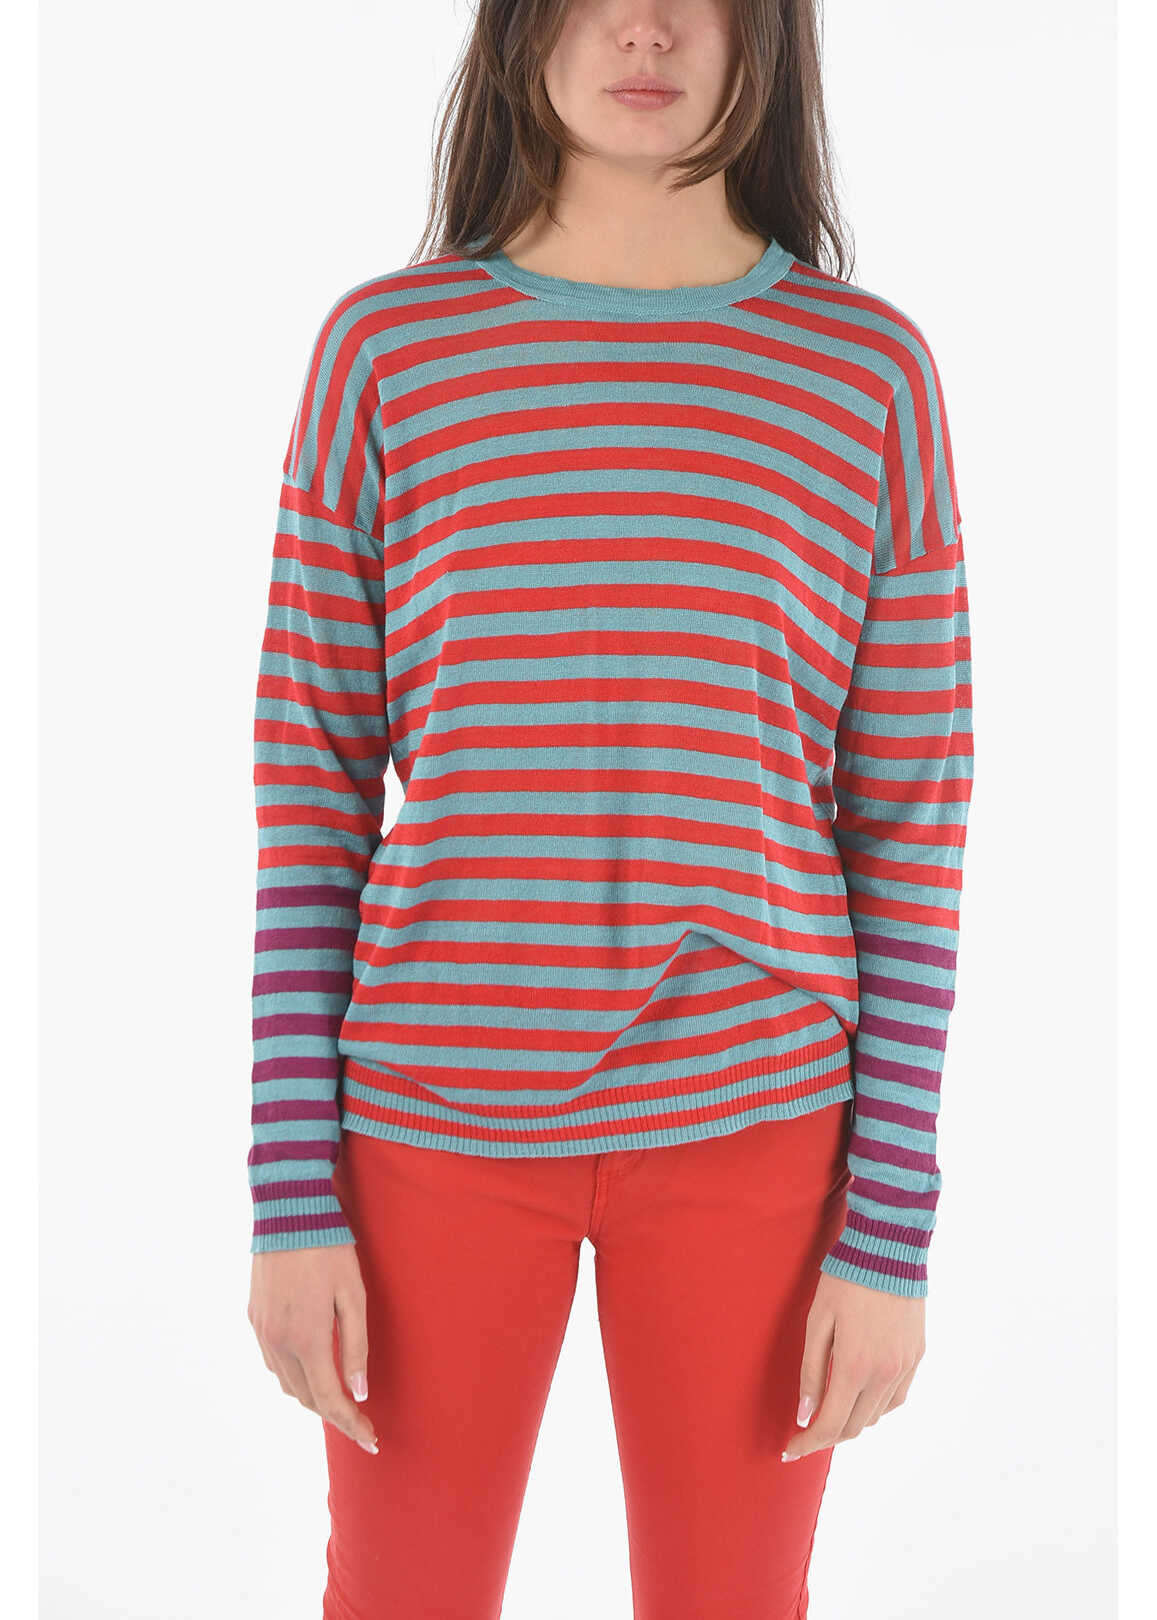 Woolrich Striped Two-Tone Flax Sweater Blue